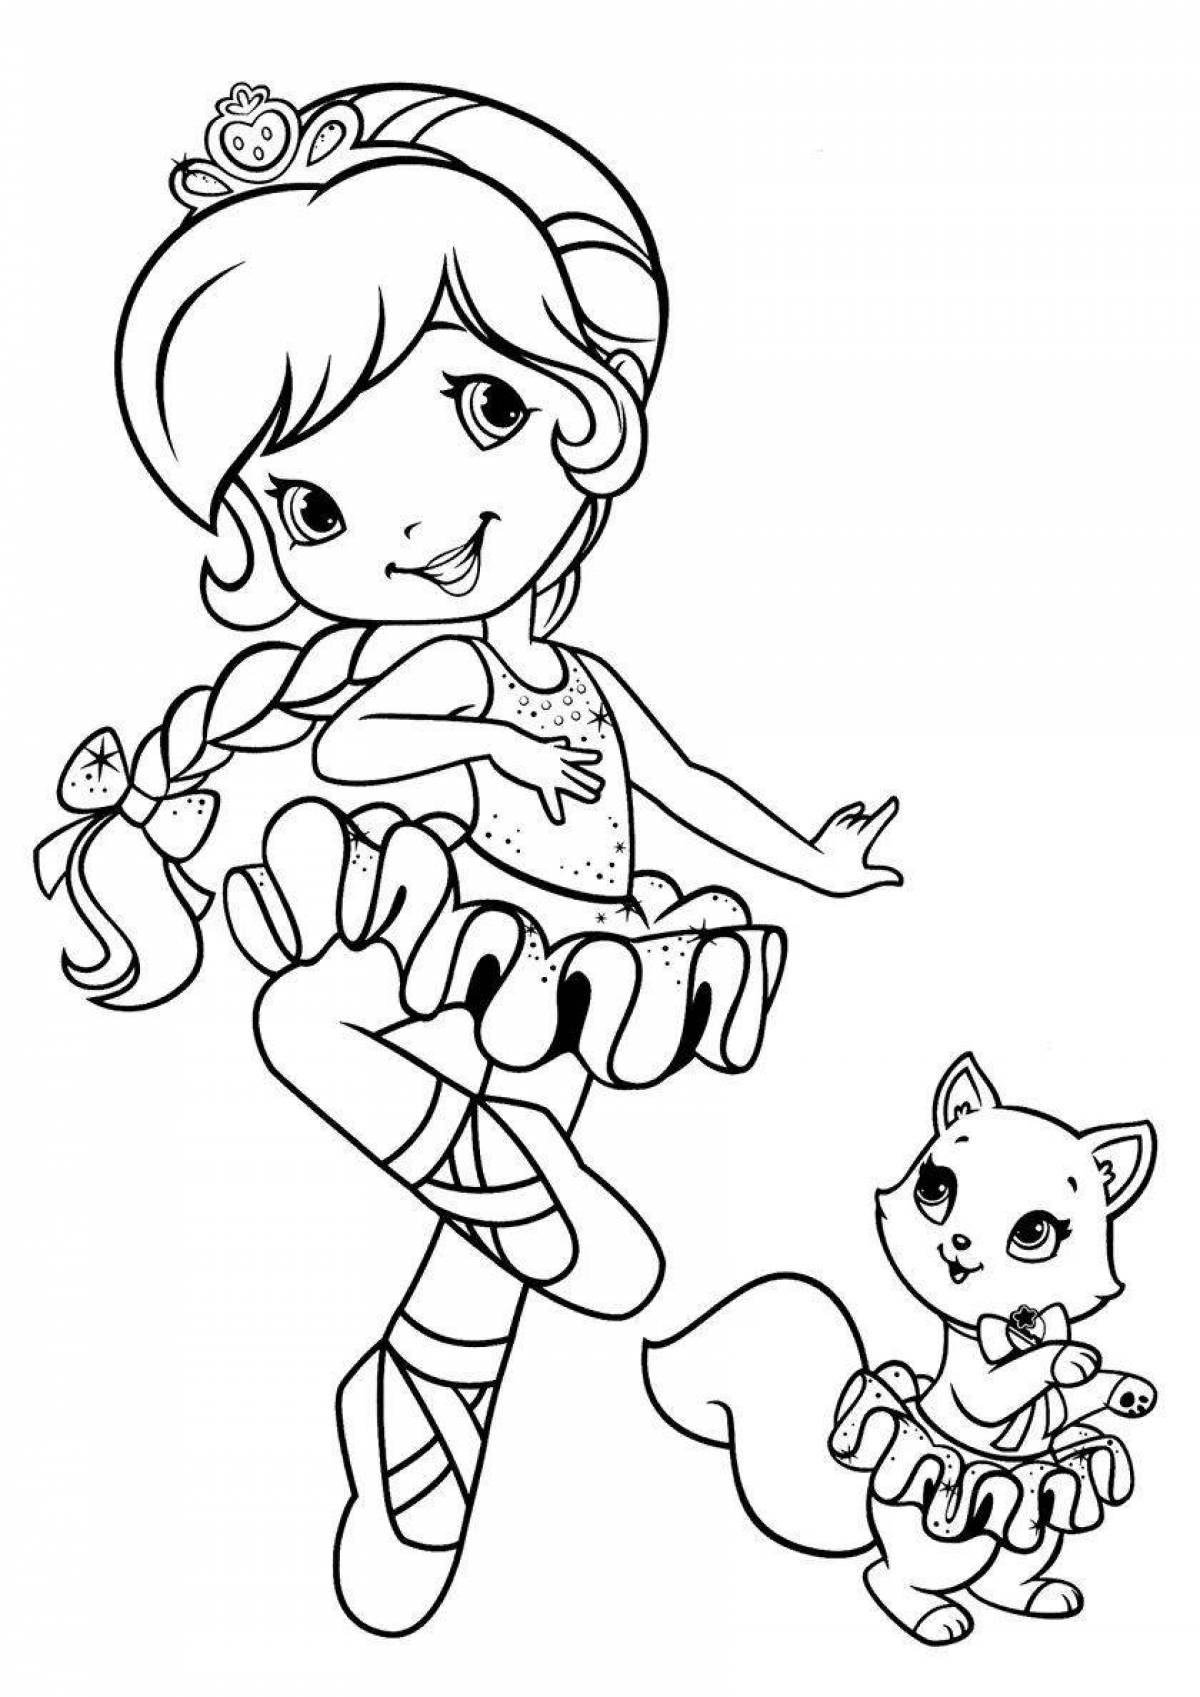 Coloring page funny cat ballerina